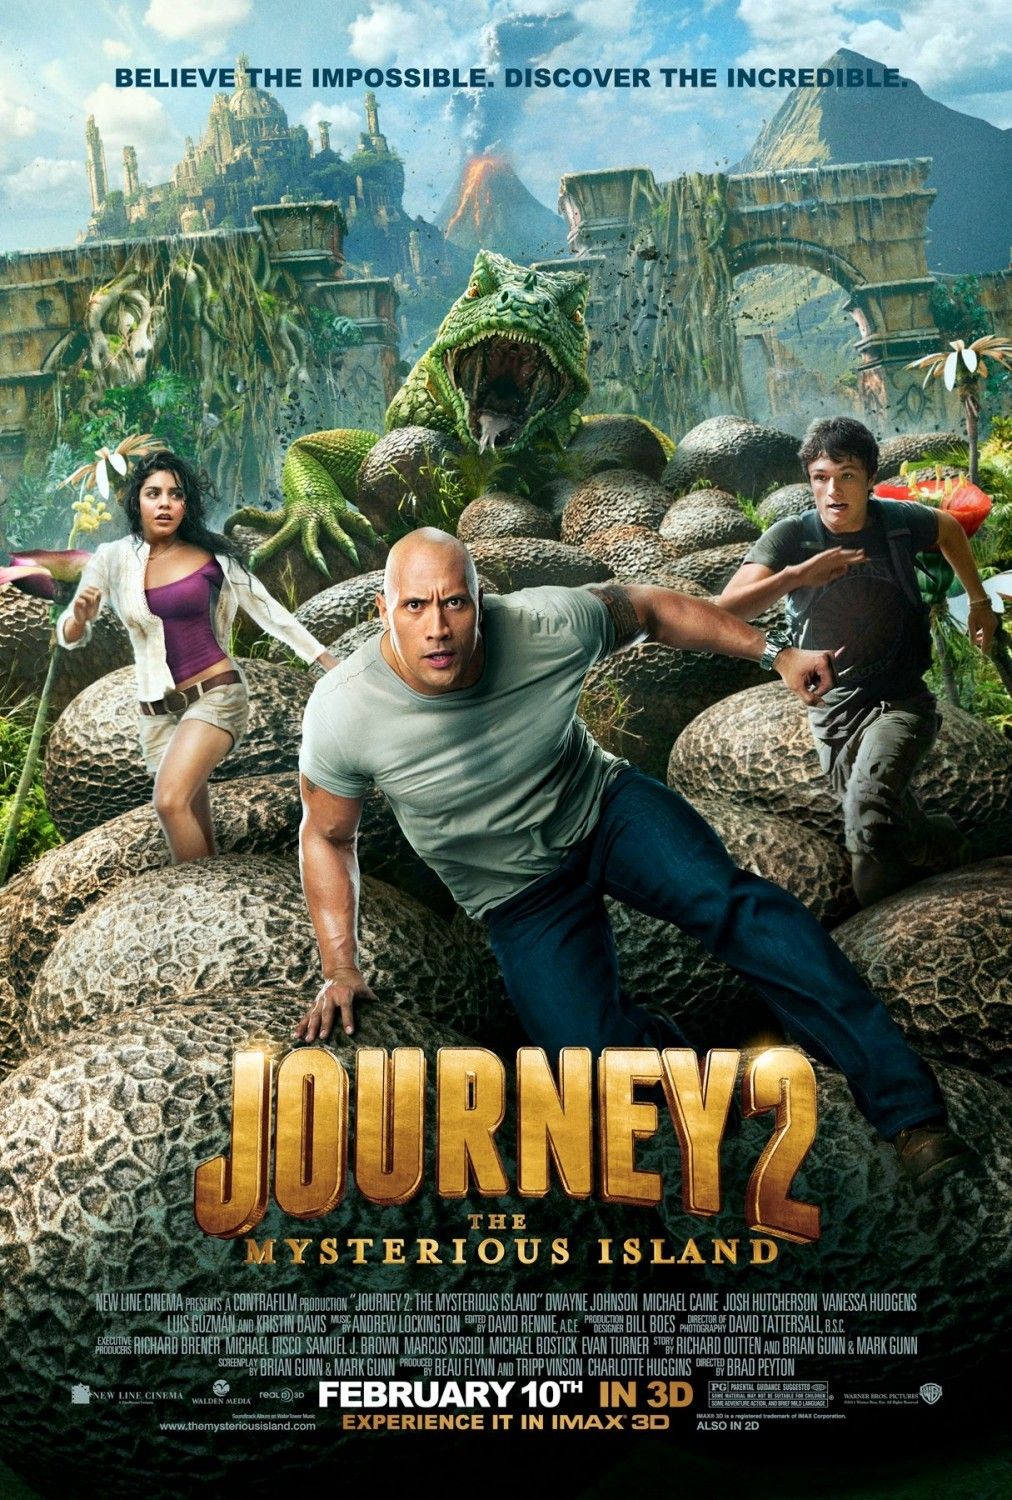 Journey 2 The Mysterious Island (2012) Hindi Dubbed Full Movie